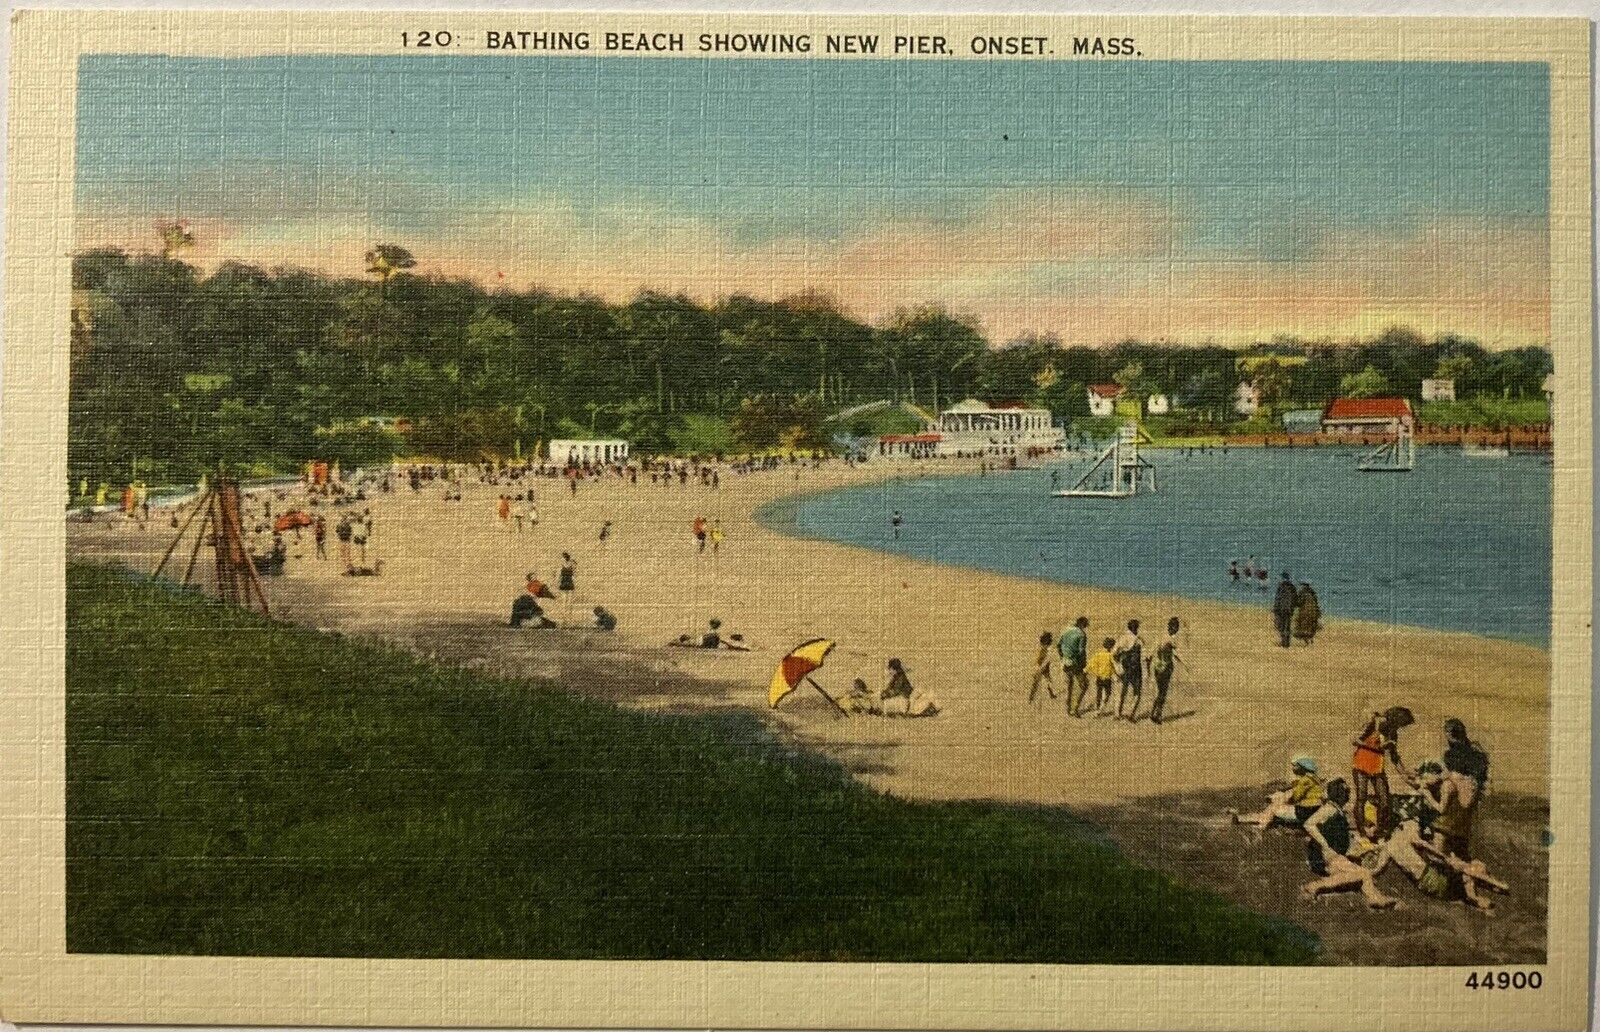 ONSET, MASS. C.1940 PC. (A46)~VIEW OF BATHING BEACH SHOWING NEW PIER